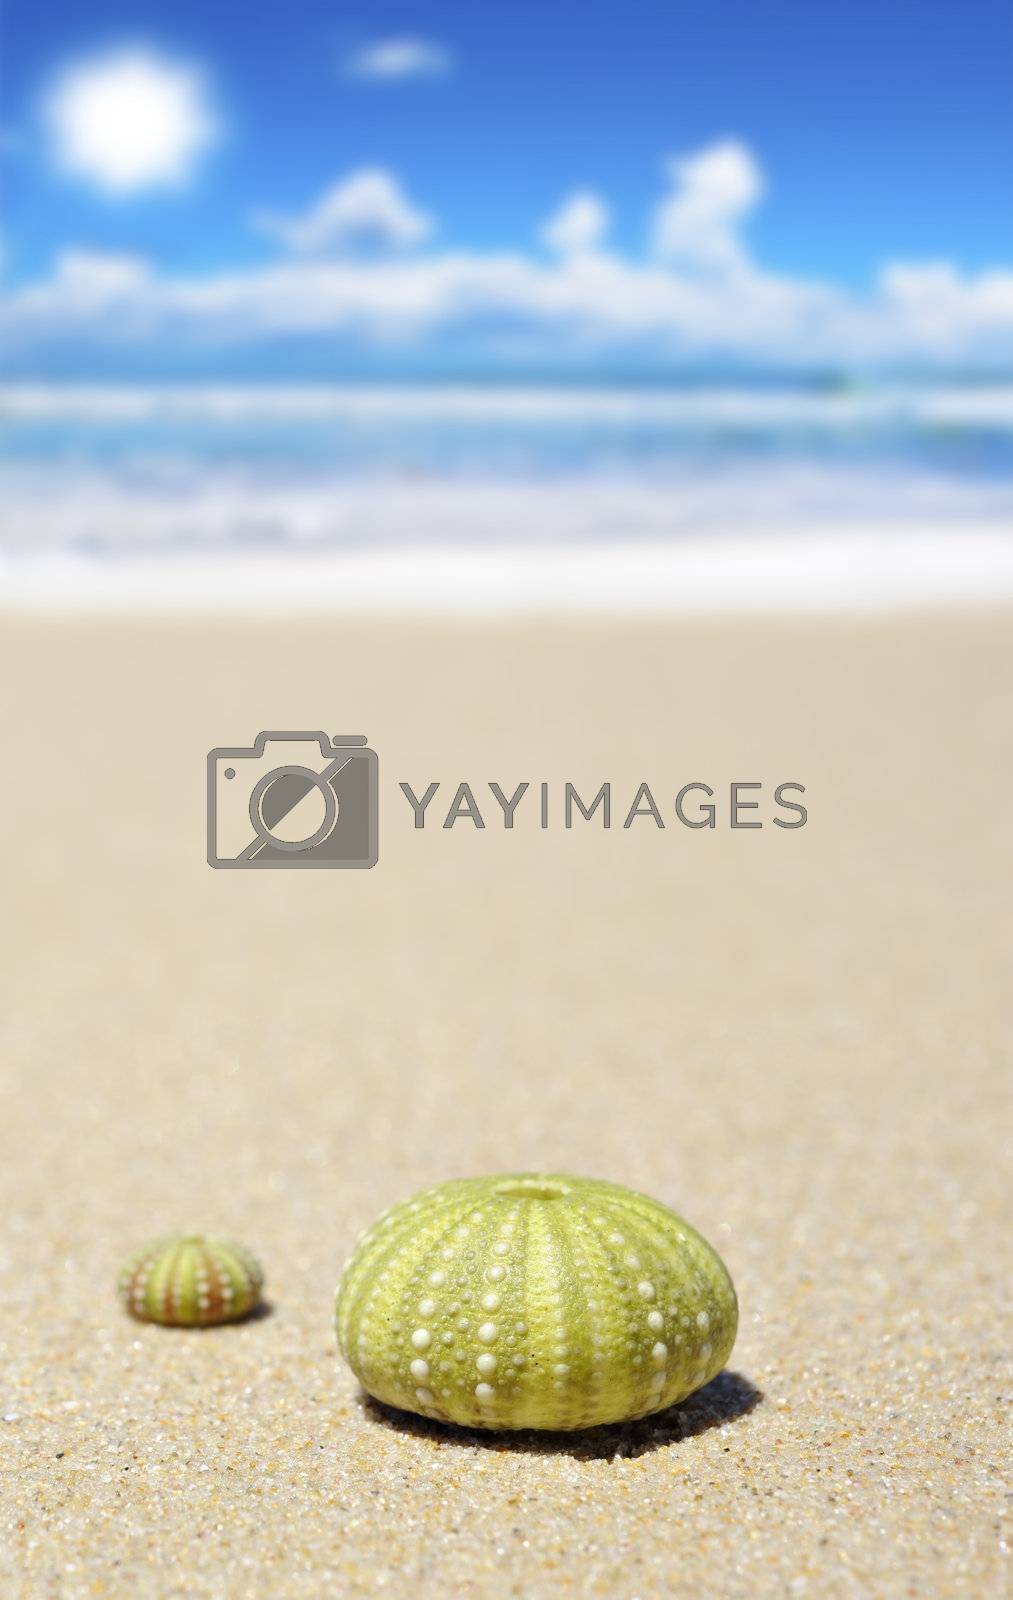 Royalty free image of Beach scene with two dead sea urchins by tish1